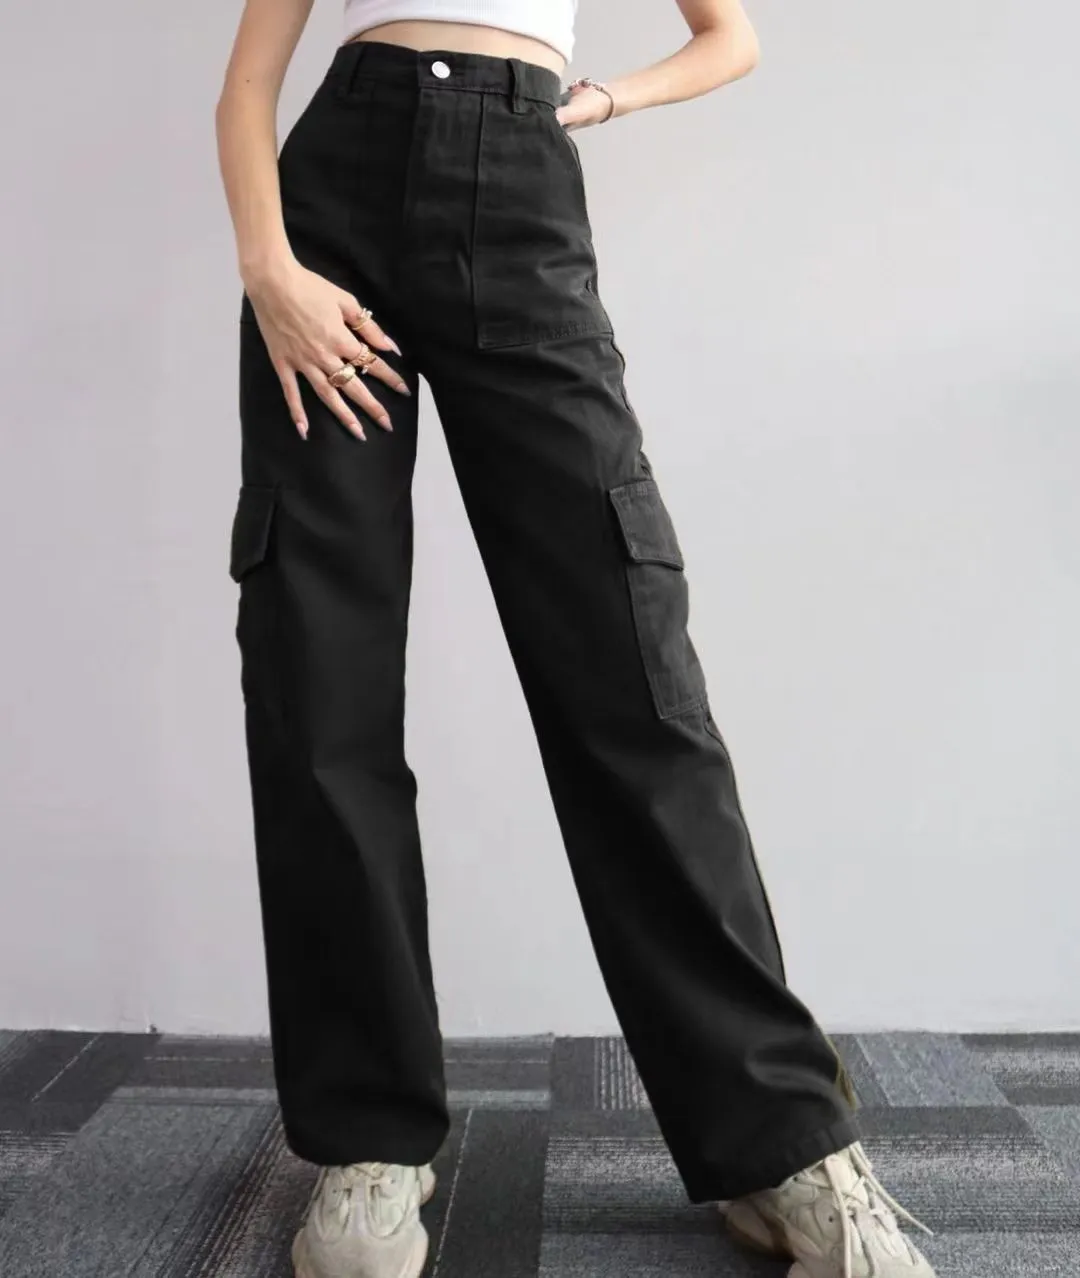 Women's Cargo Pants Solid Color High Waist Overalls Pants With